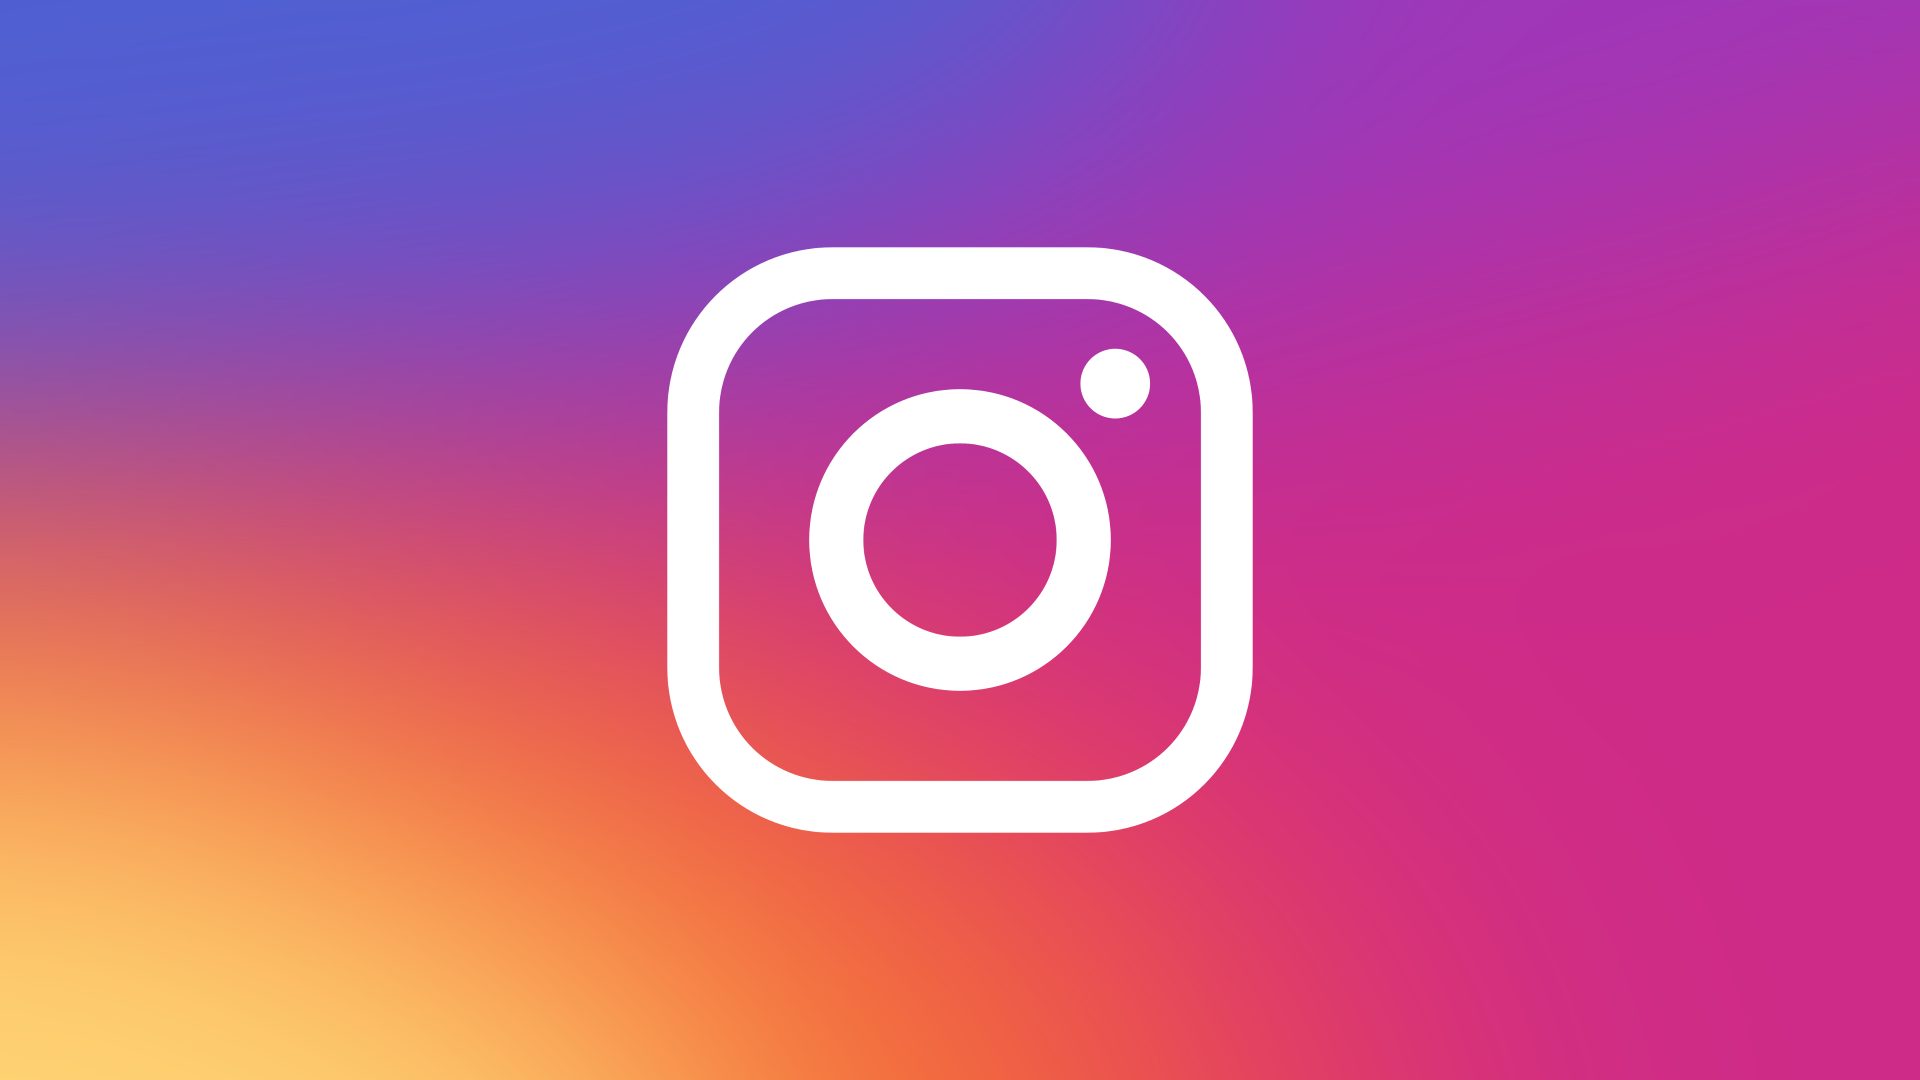 A white Instagram logo (which looks like the outine of a camera) on a colourful gradient background